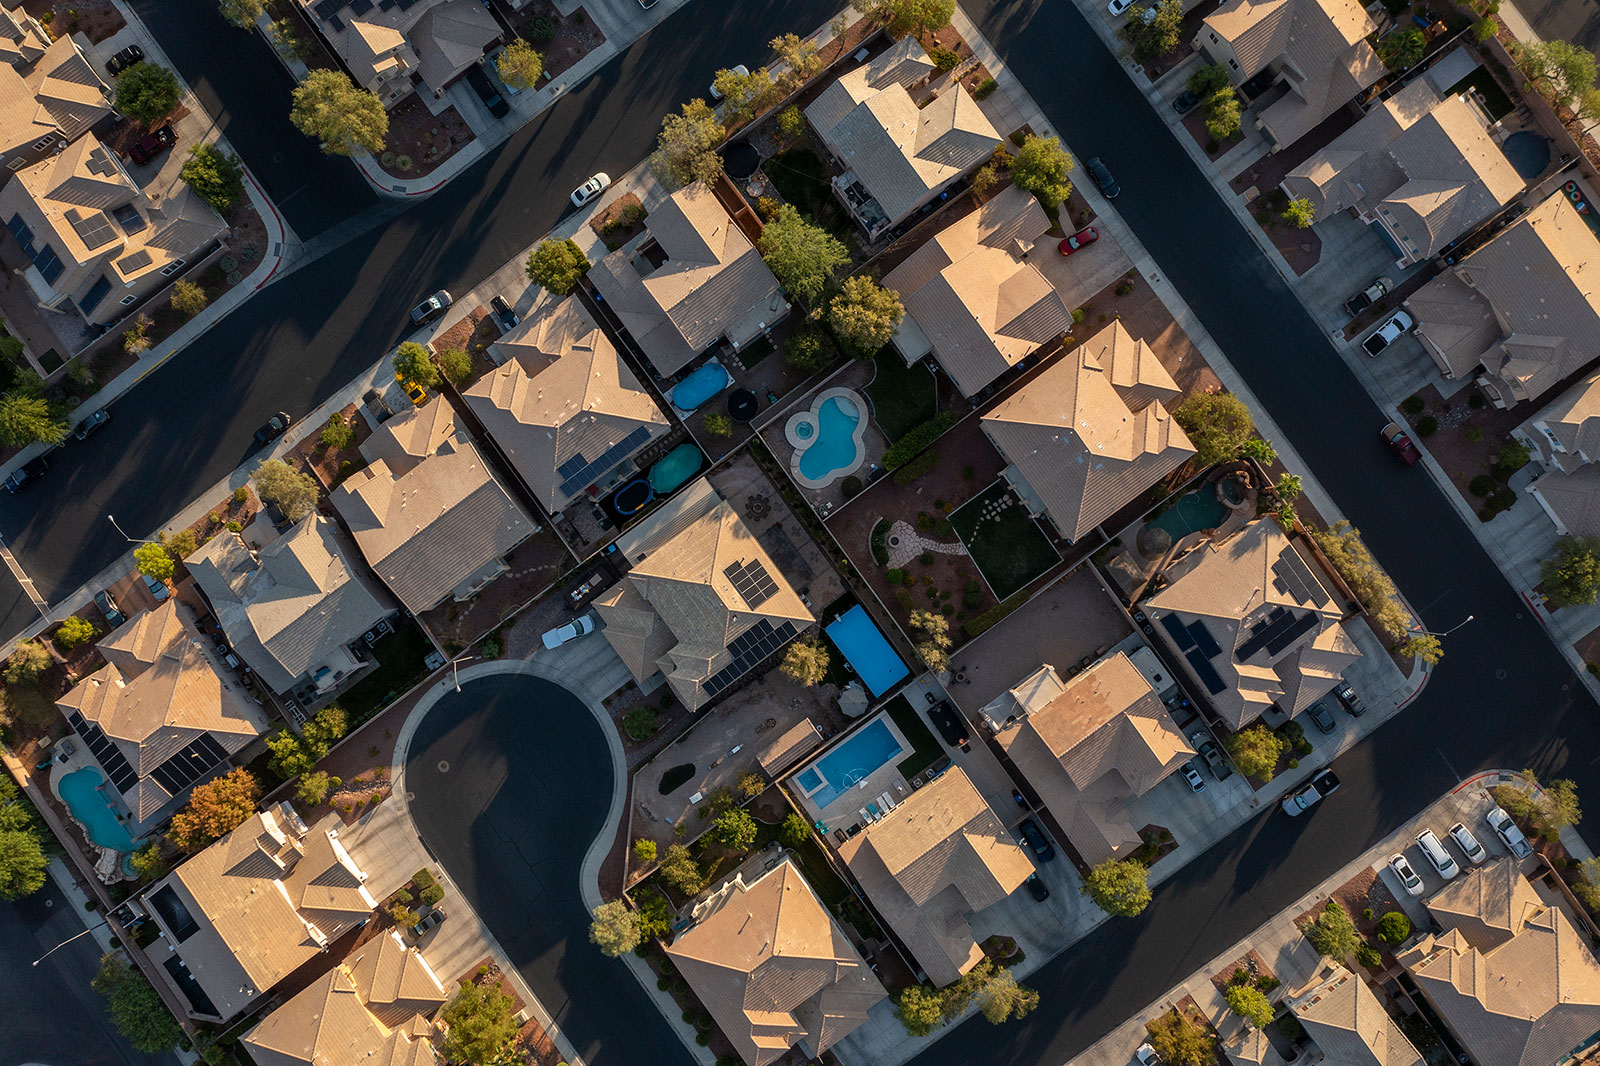 Swimming pools sit in the backyards of homes in a residential neighborhood in Henderson, Nevada, in July 2021.